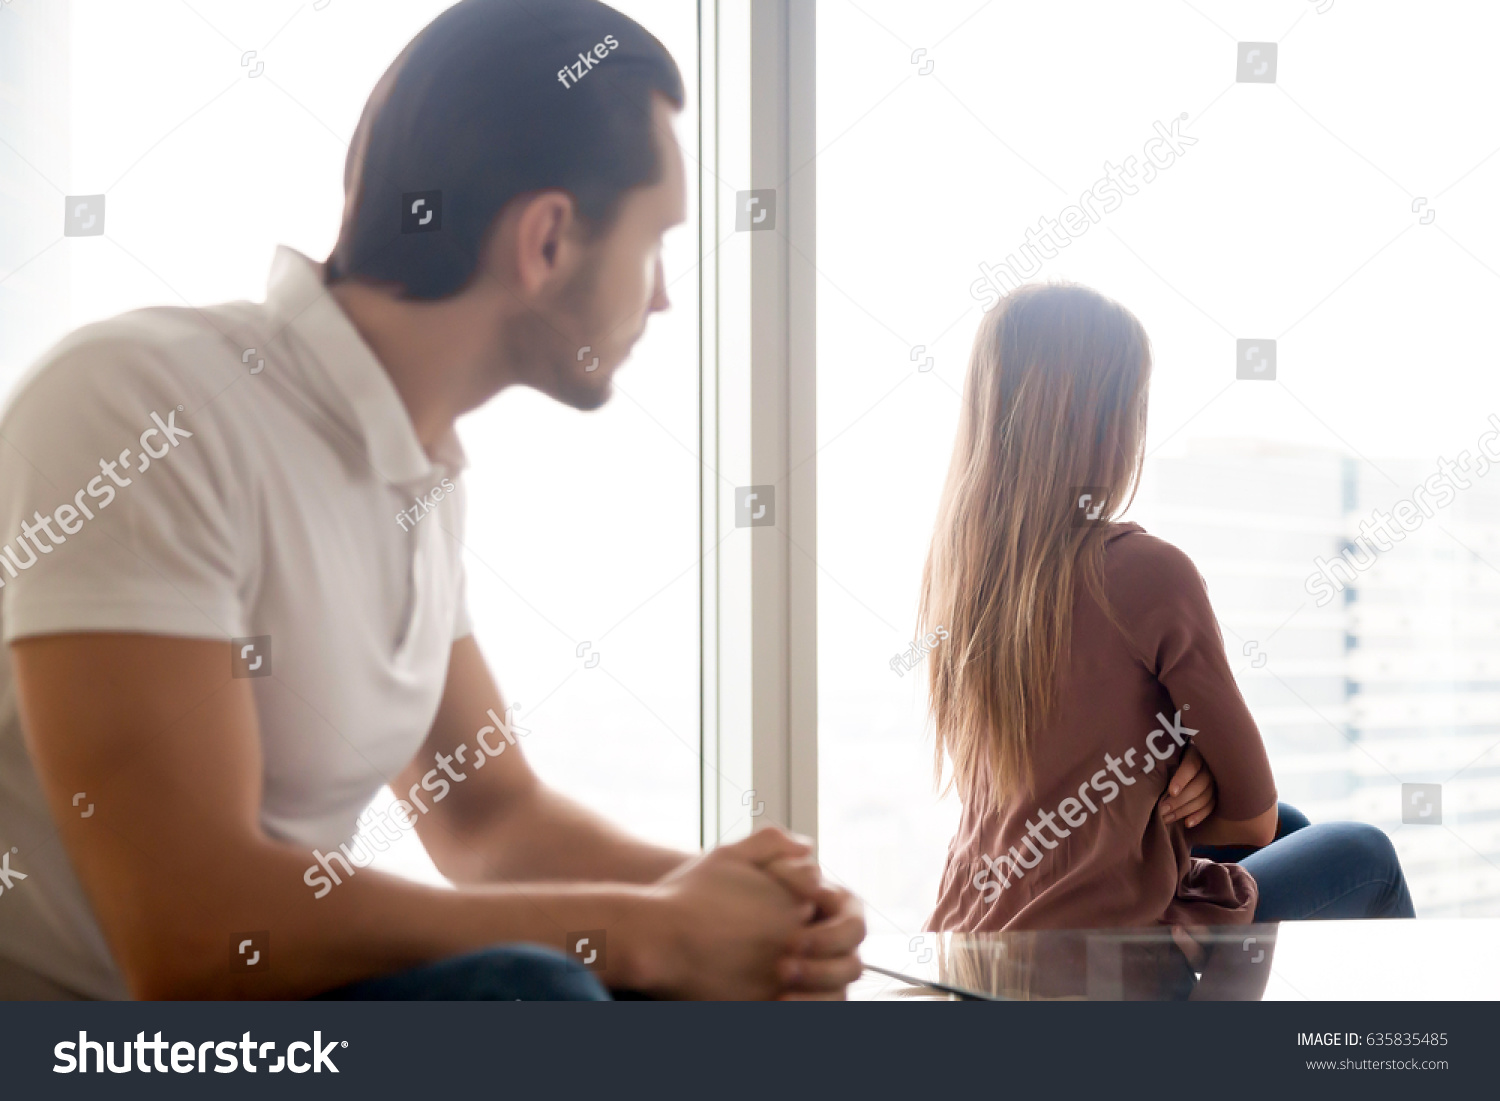 stock-photo-family-couple-having-problems-incomprehension-and-misunderstanding-in-relationships-lack-of-a-635835485.jpg